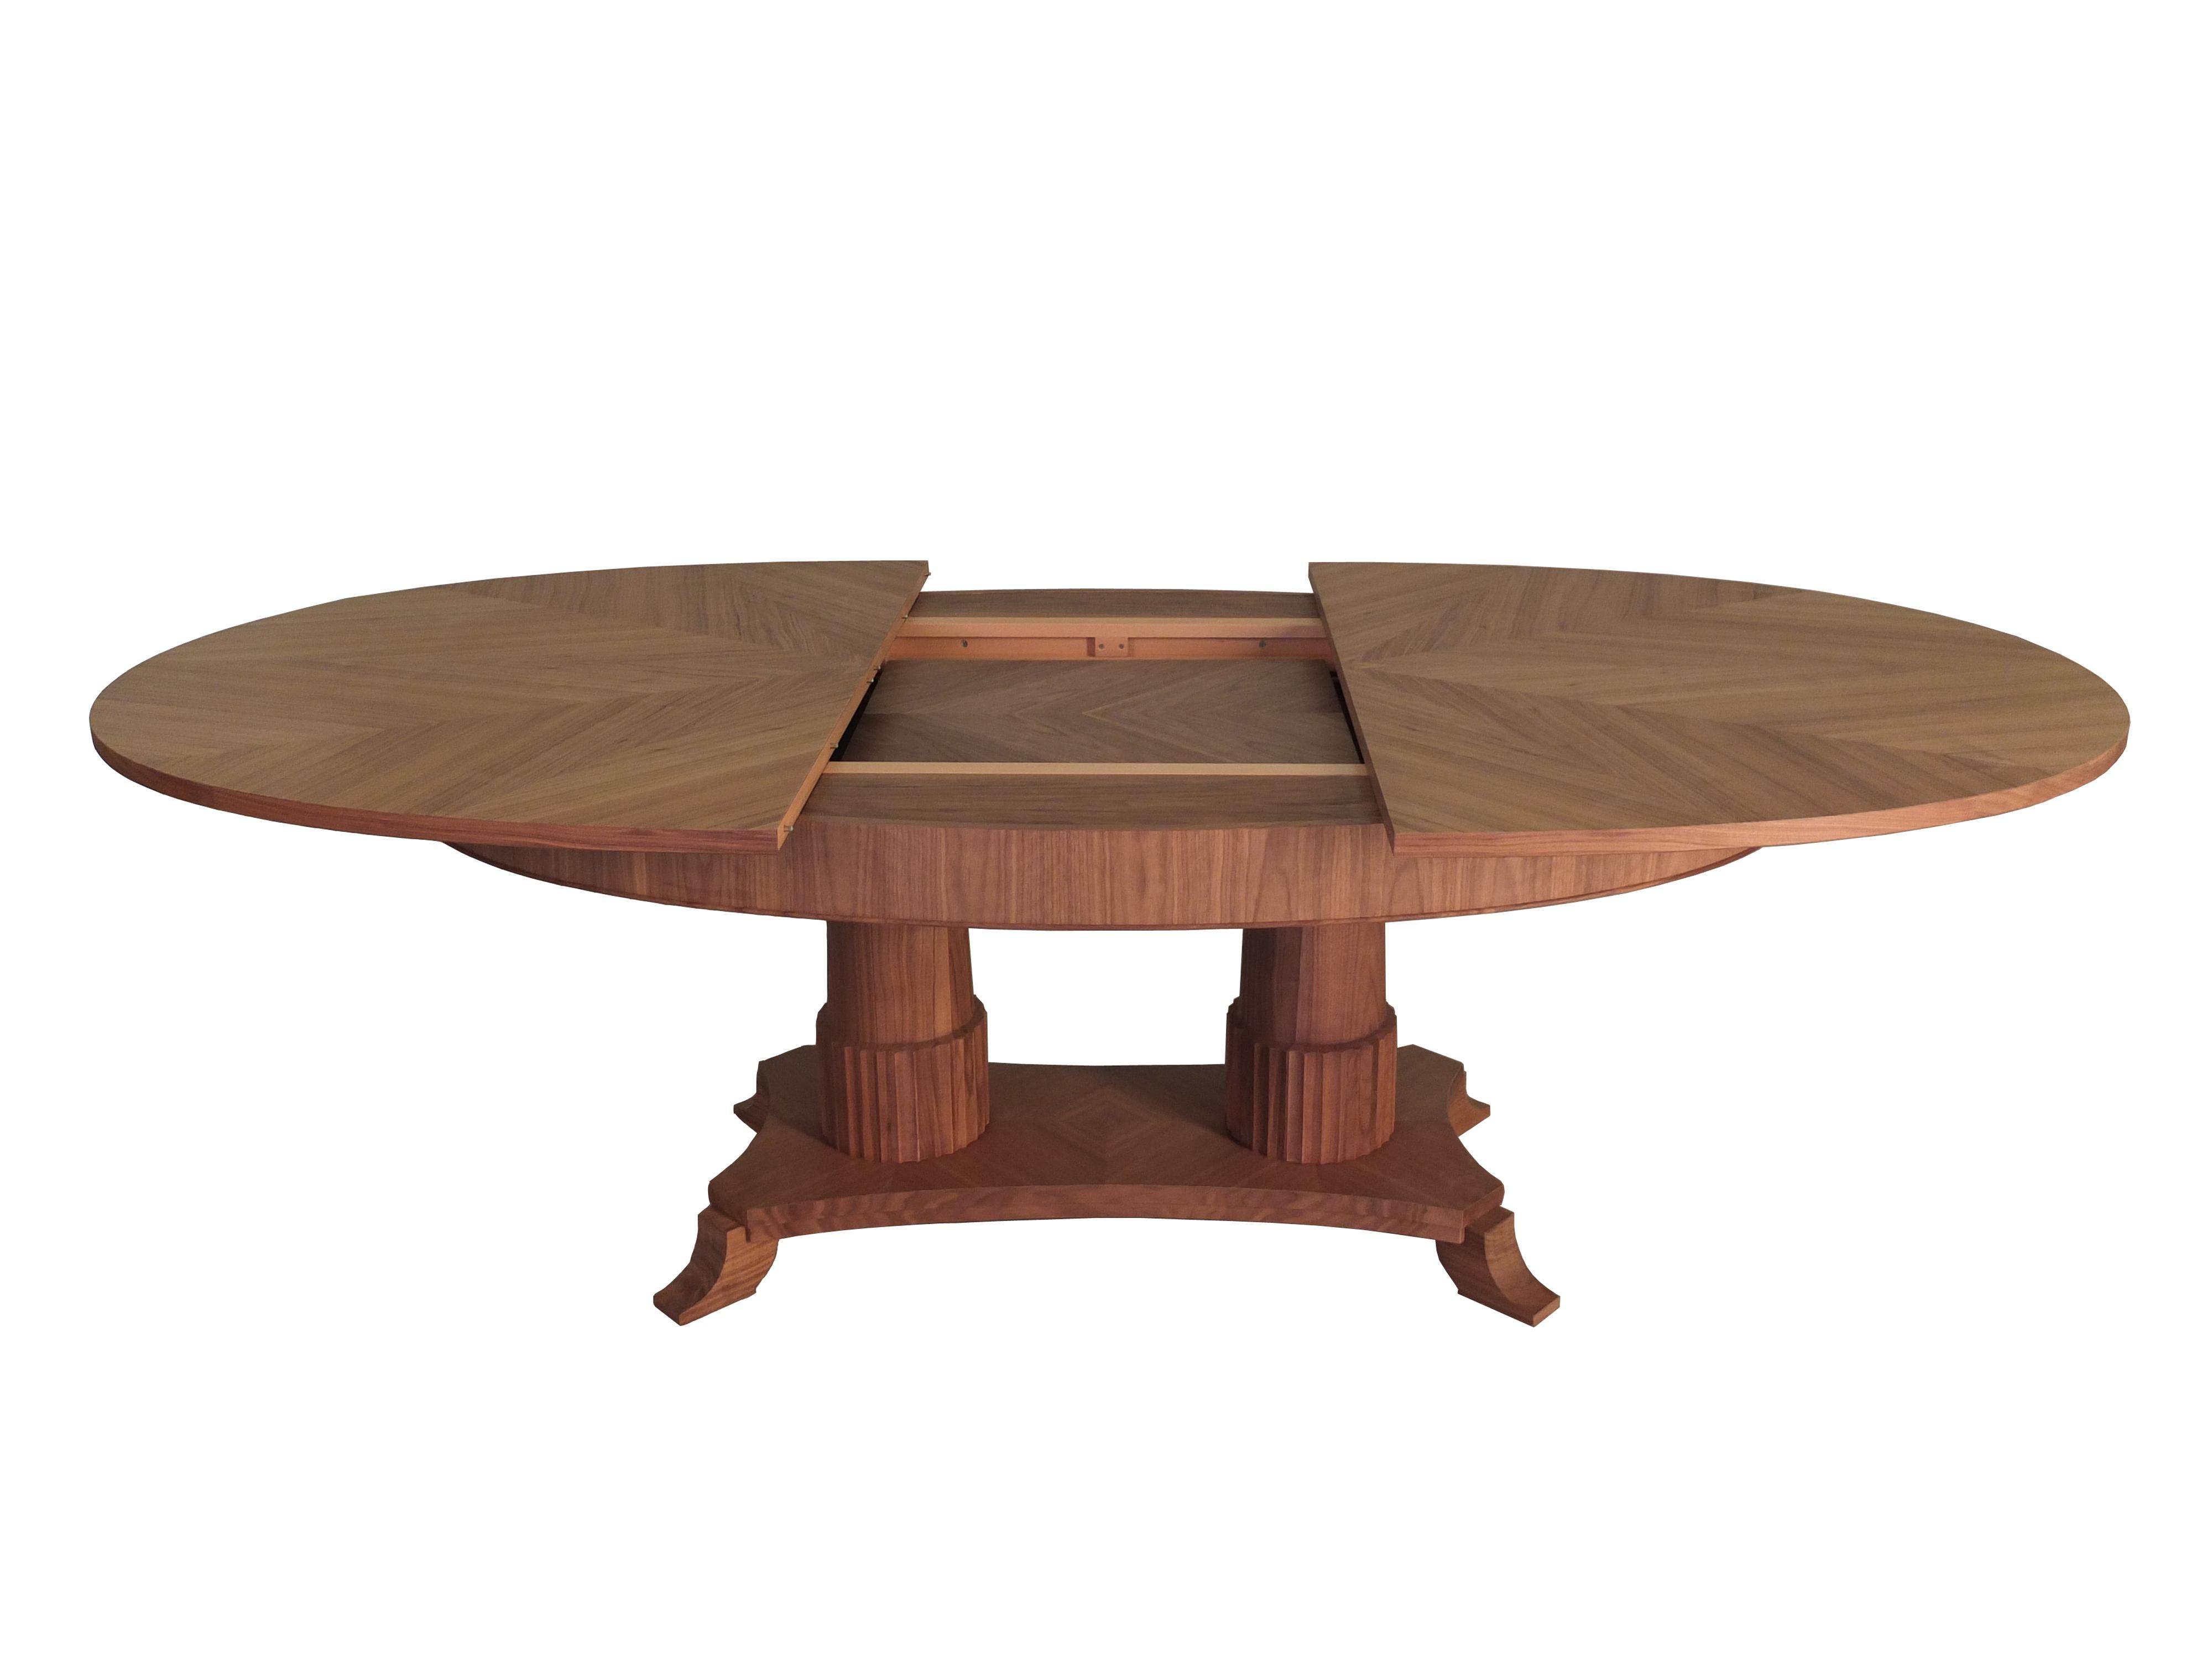 Contemporary extendable table in Biedermeier style made of cherry wood 1